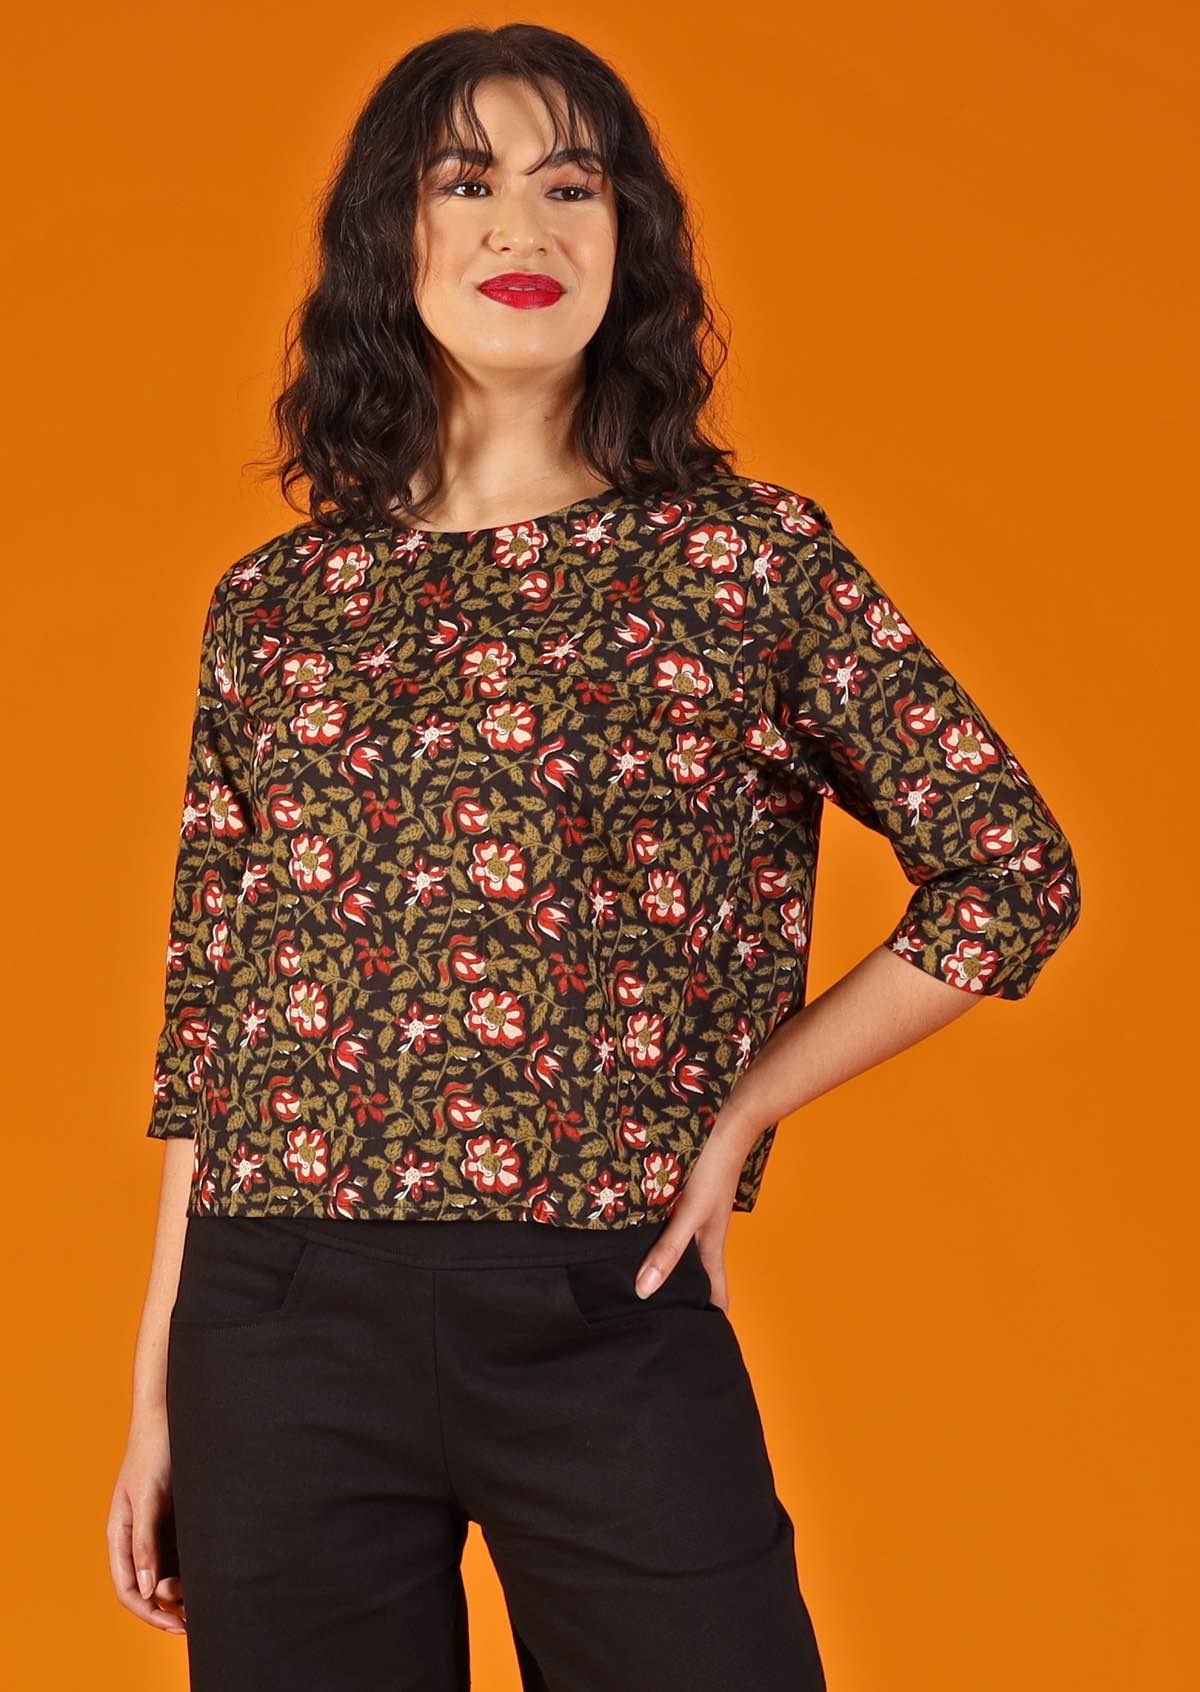 woman with dark hair and red lipstick in boxy cotton blouse, black base with  floral design 